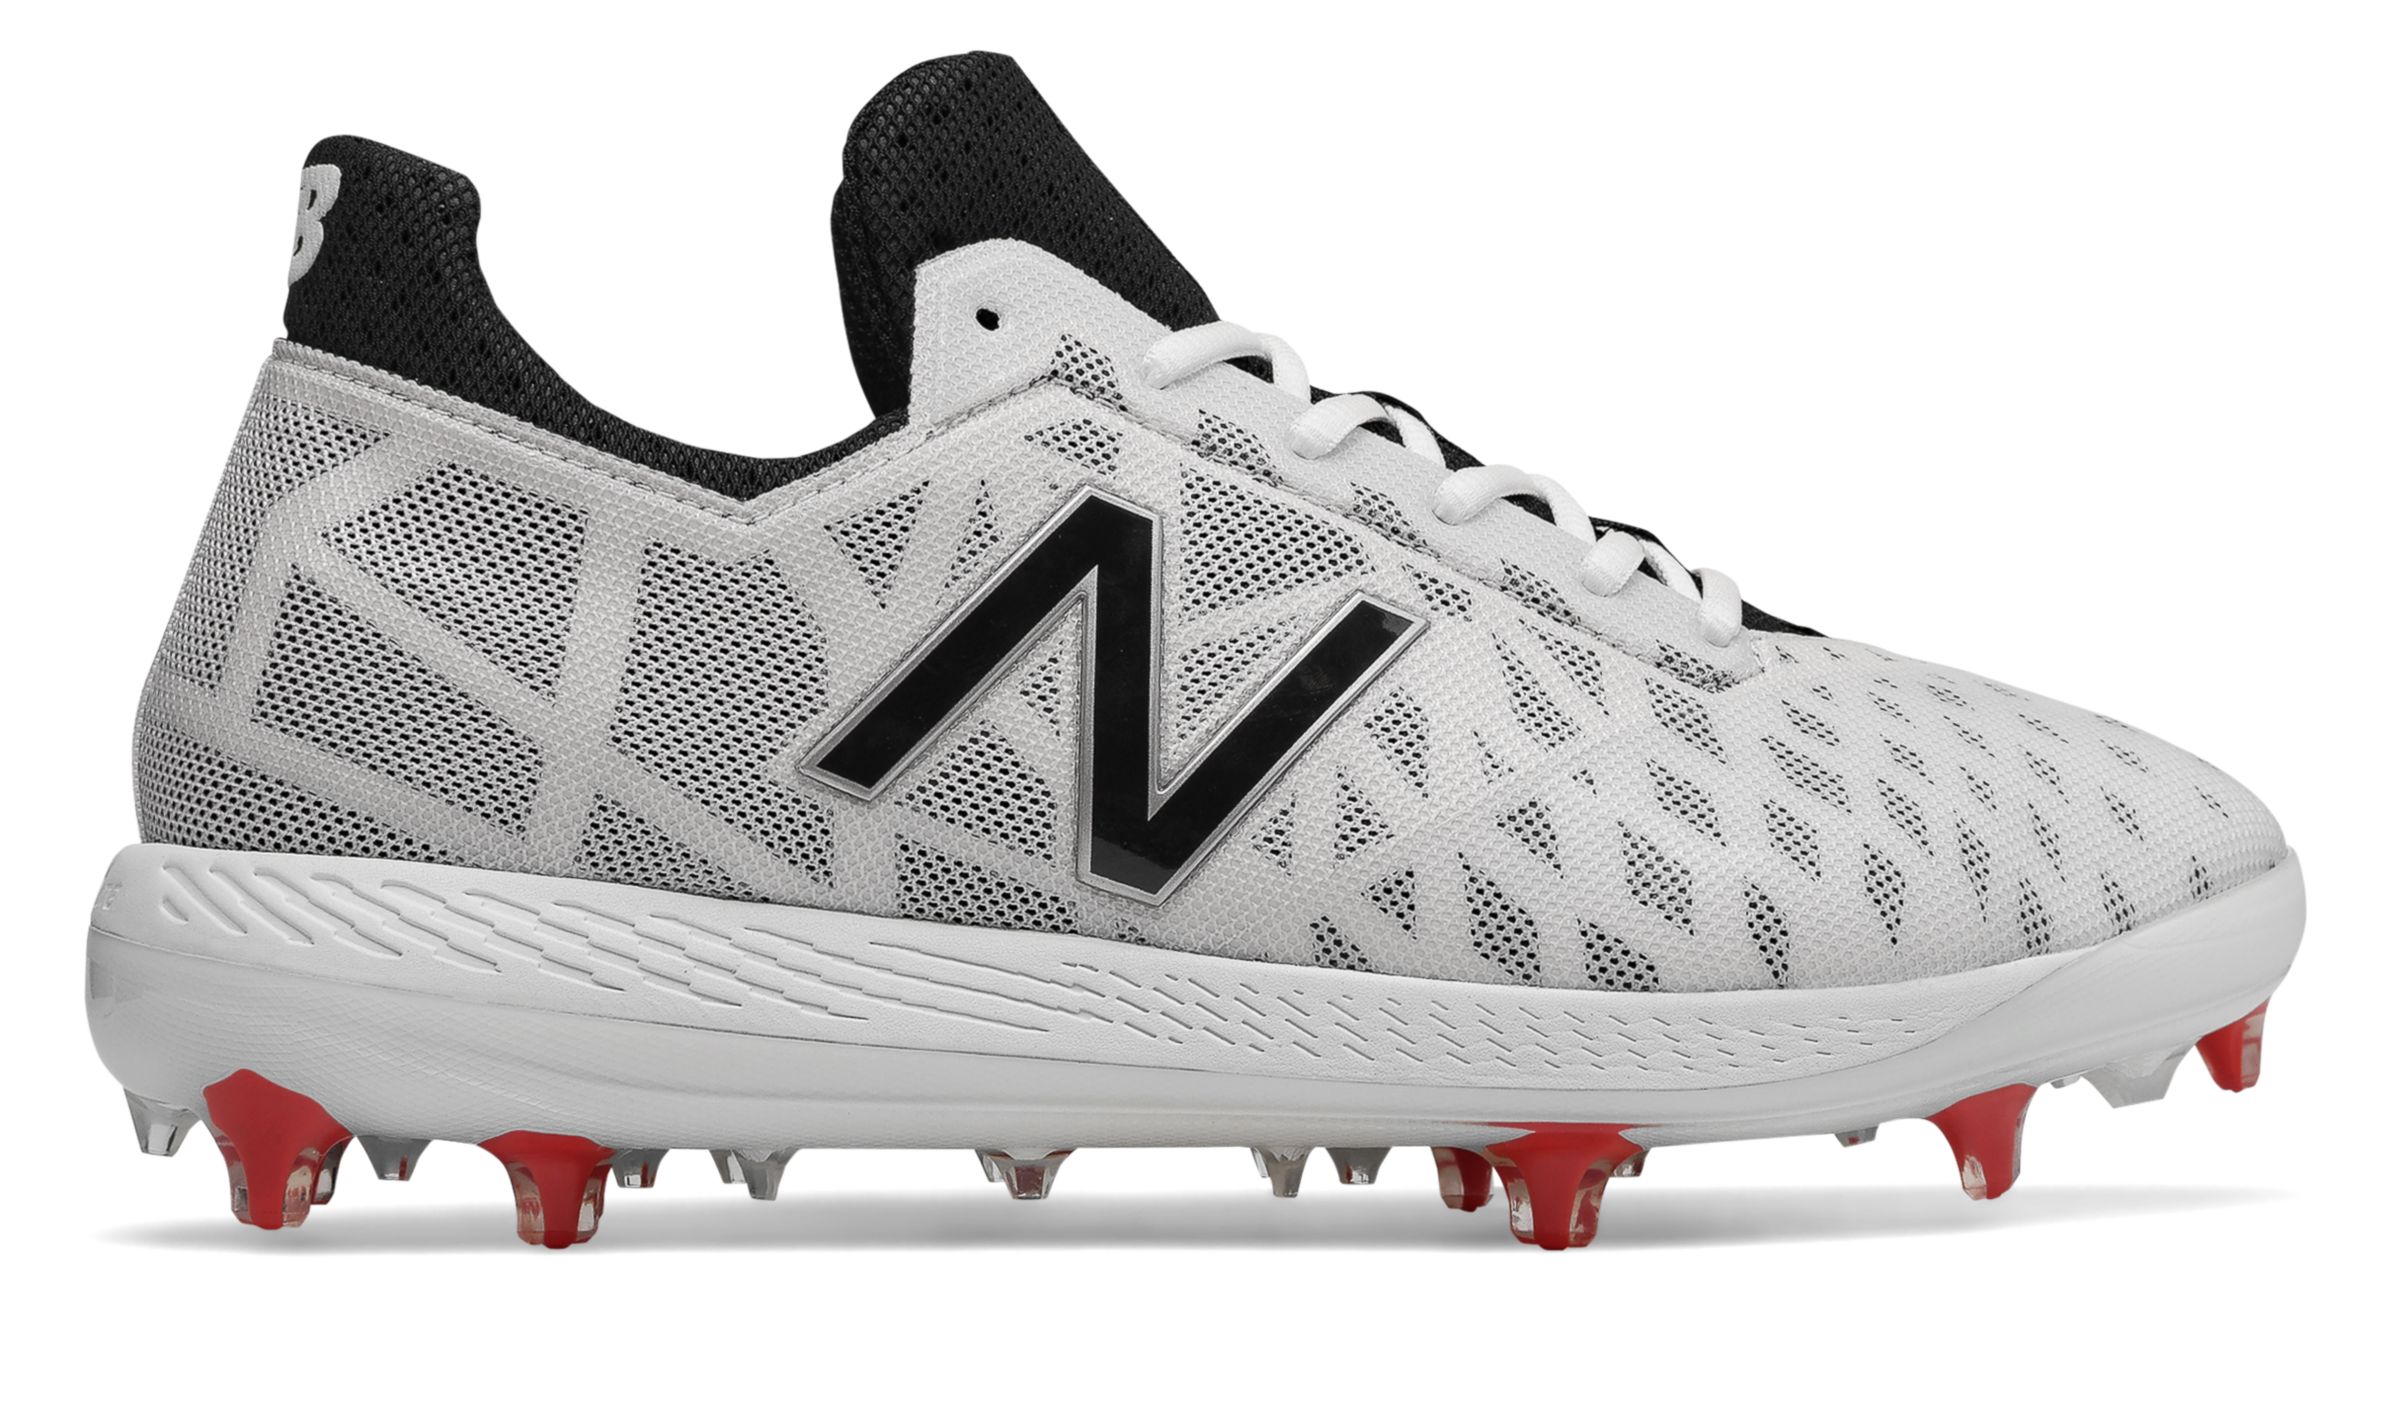 compv1 baseball cleats review